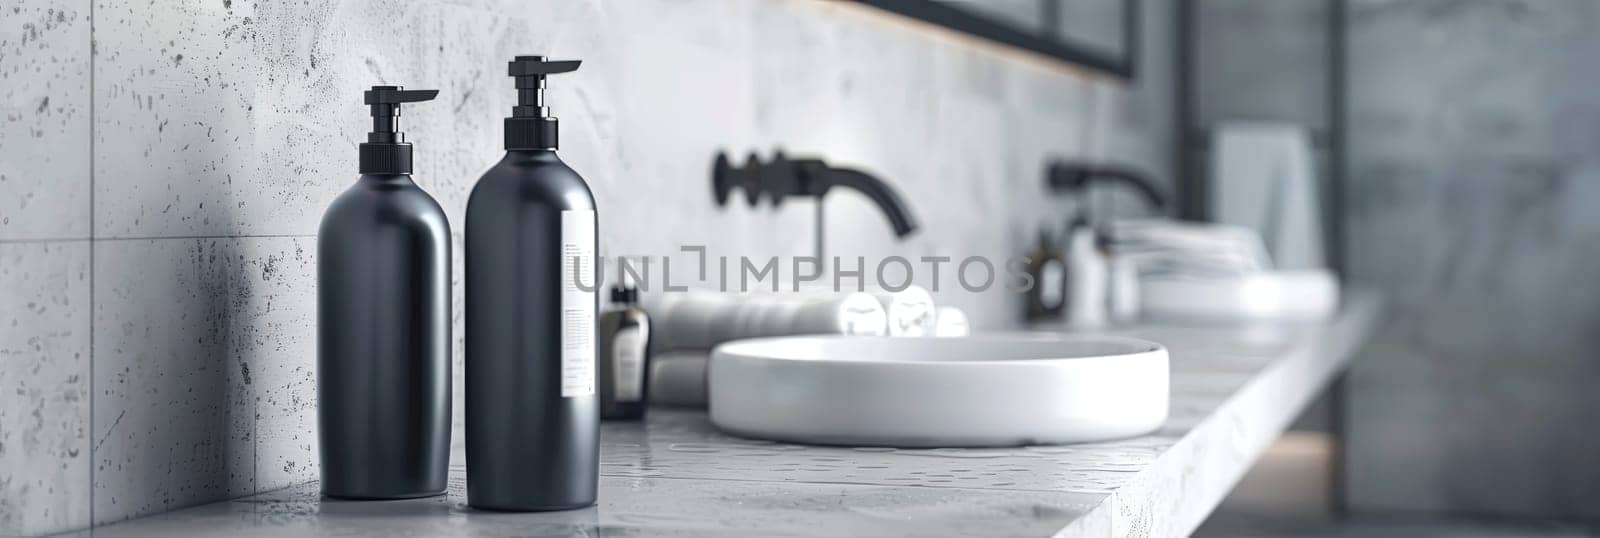 Two sleek shampoo and conditioner bottles on a bathroom counter.